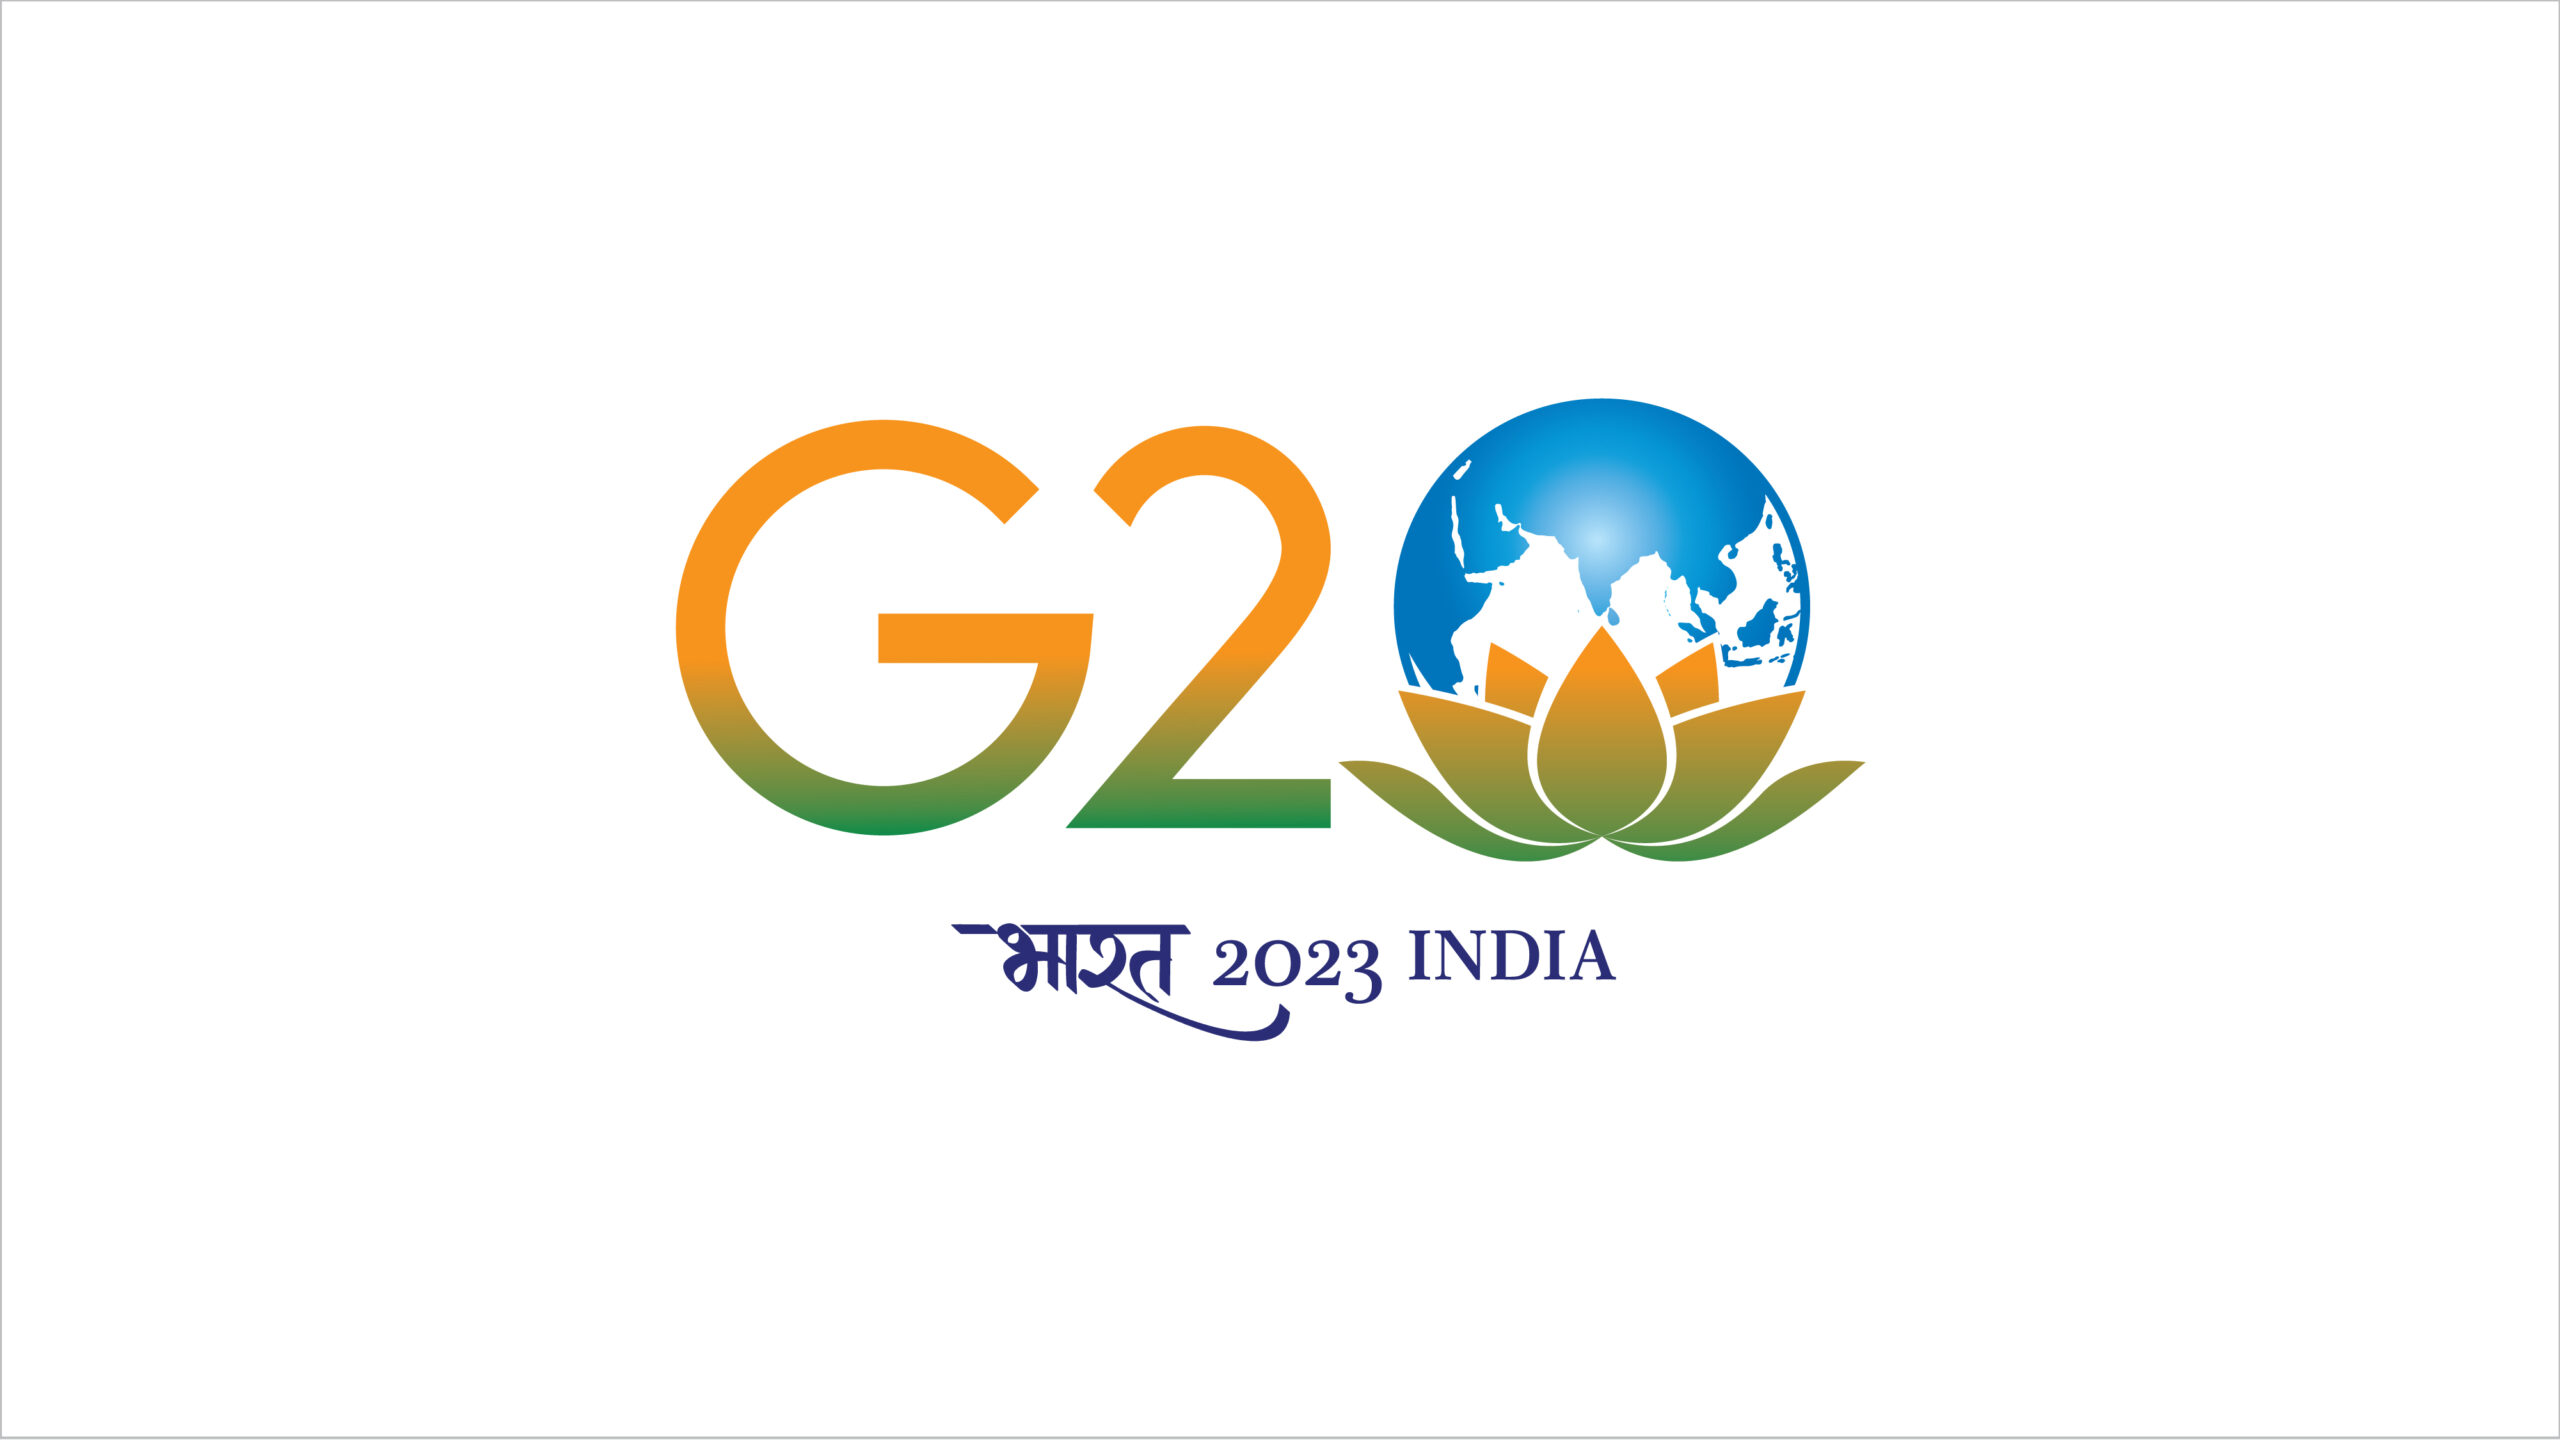 PUNE, Maharashtra: A seminar on urban infrastructure was organised in the city ahead of the G20 summit. A total of five sessions were held, comprising participants from central and state-level officials and also representatives of financial institutes and industry.